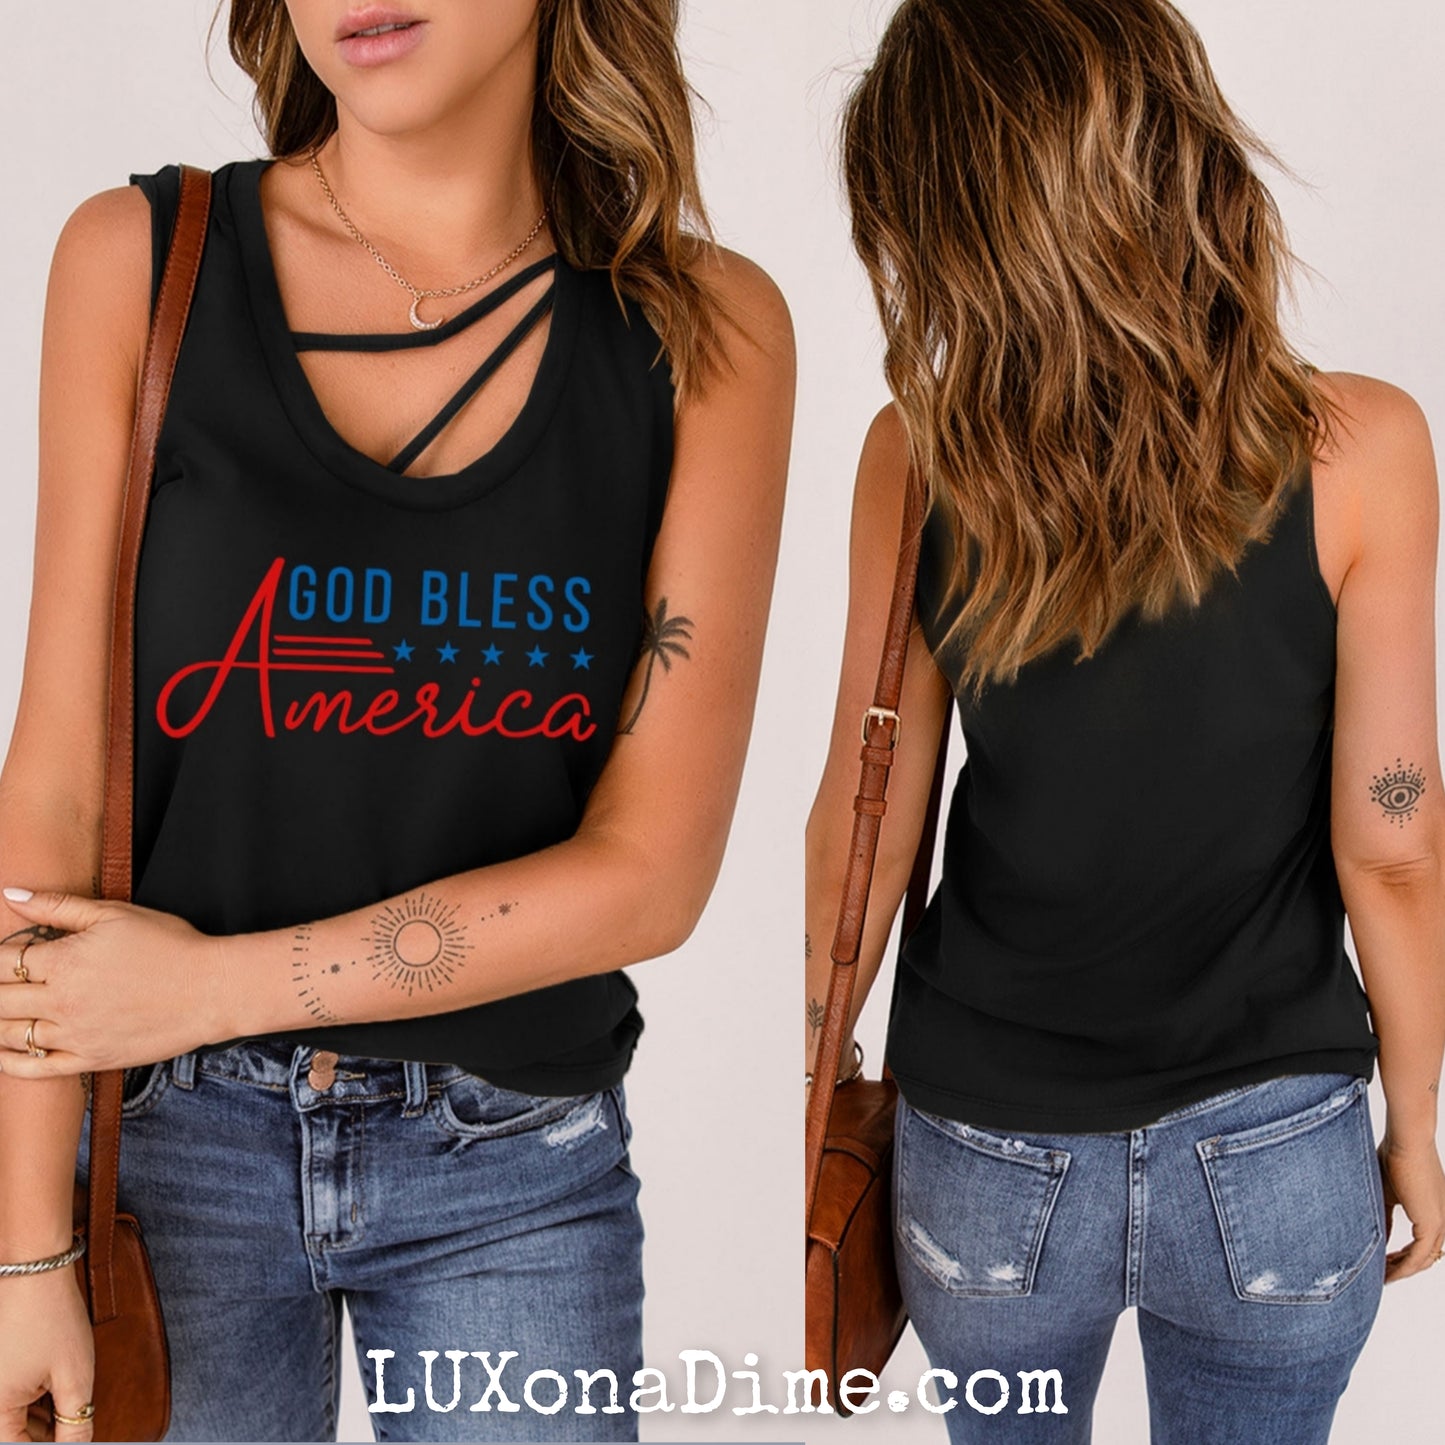 Cutout Neckline T-shirt GOD BLESS AMERICA Sleeveless Graphic Tank Top (Plus Size Available)